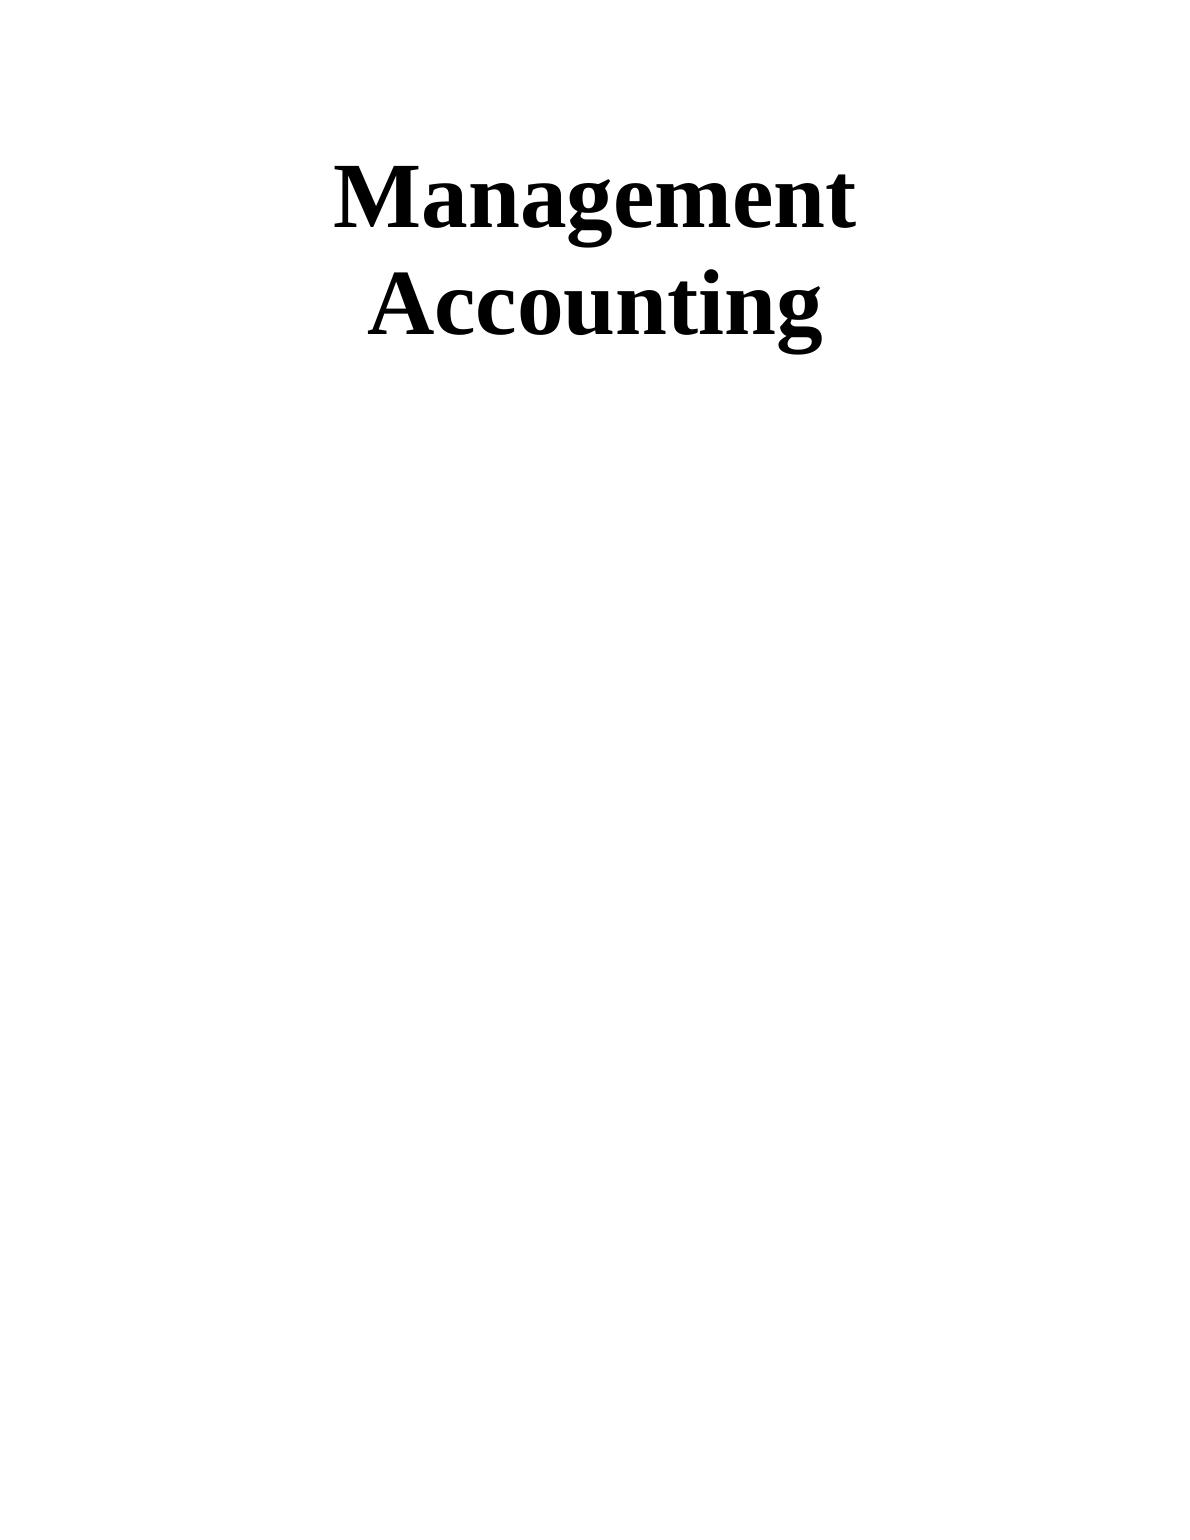 Management Accounting and Budgetary Control_1